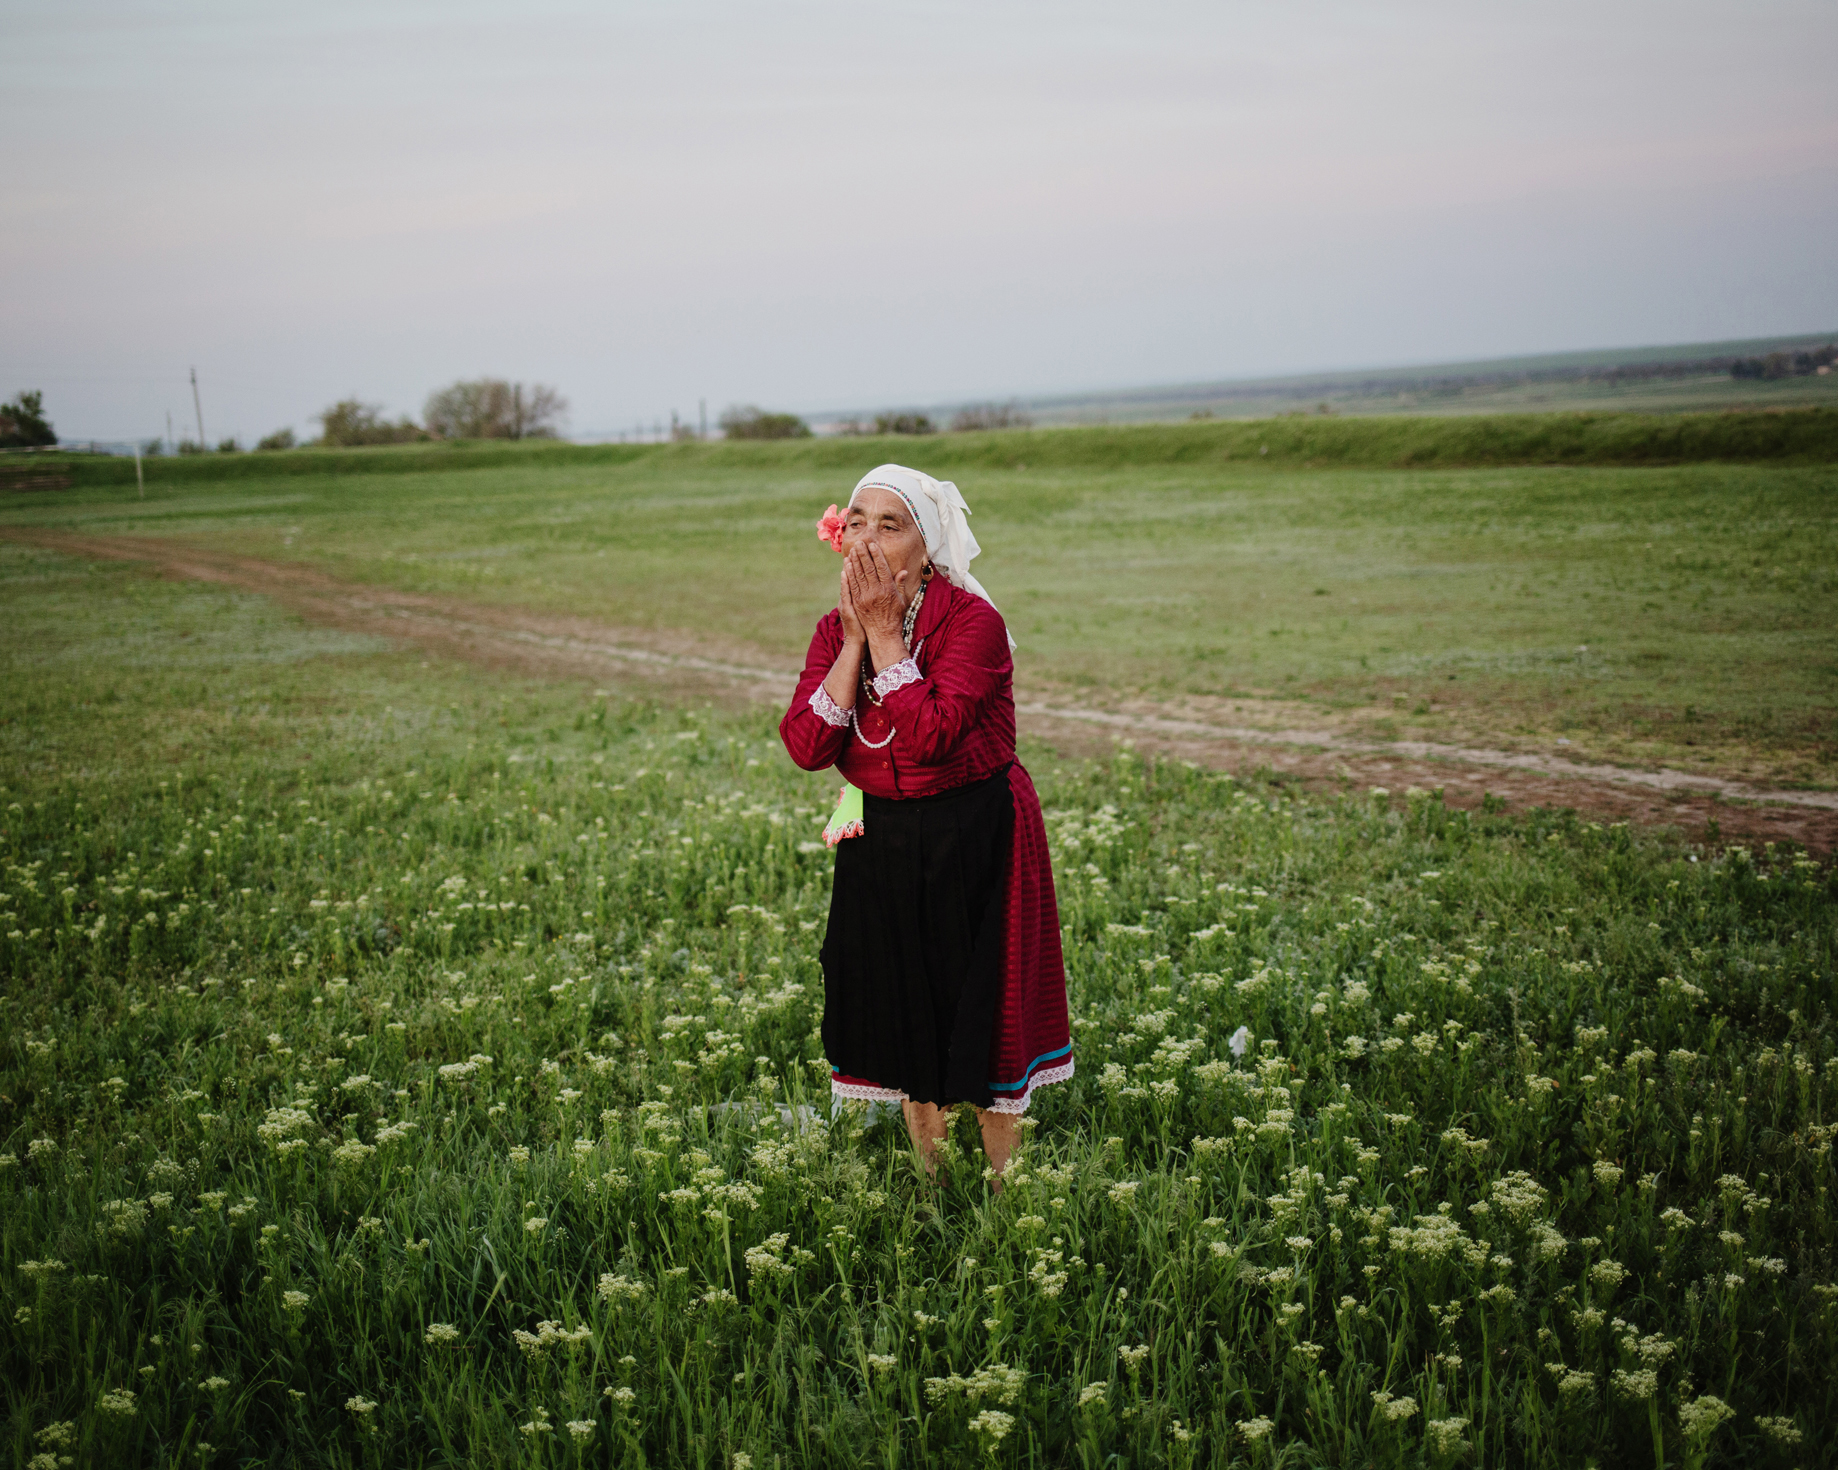  Besalma - Vasilissa Kease is a member of a tra- ditional folk group who sing old songs and “perform” Gagauz traditions as on this photo (washing face in the dew the morning of Hederlez) 